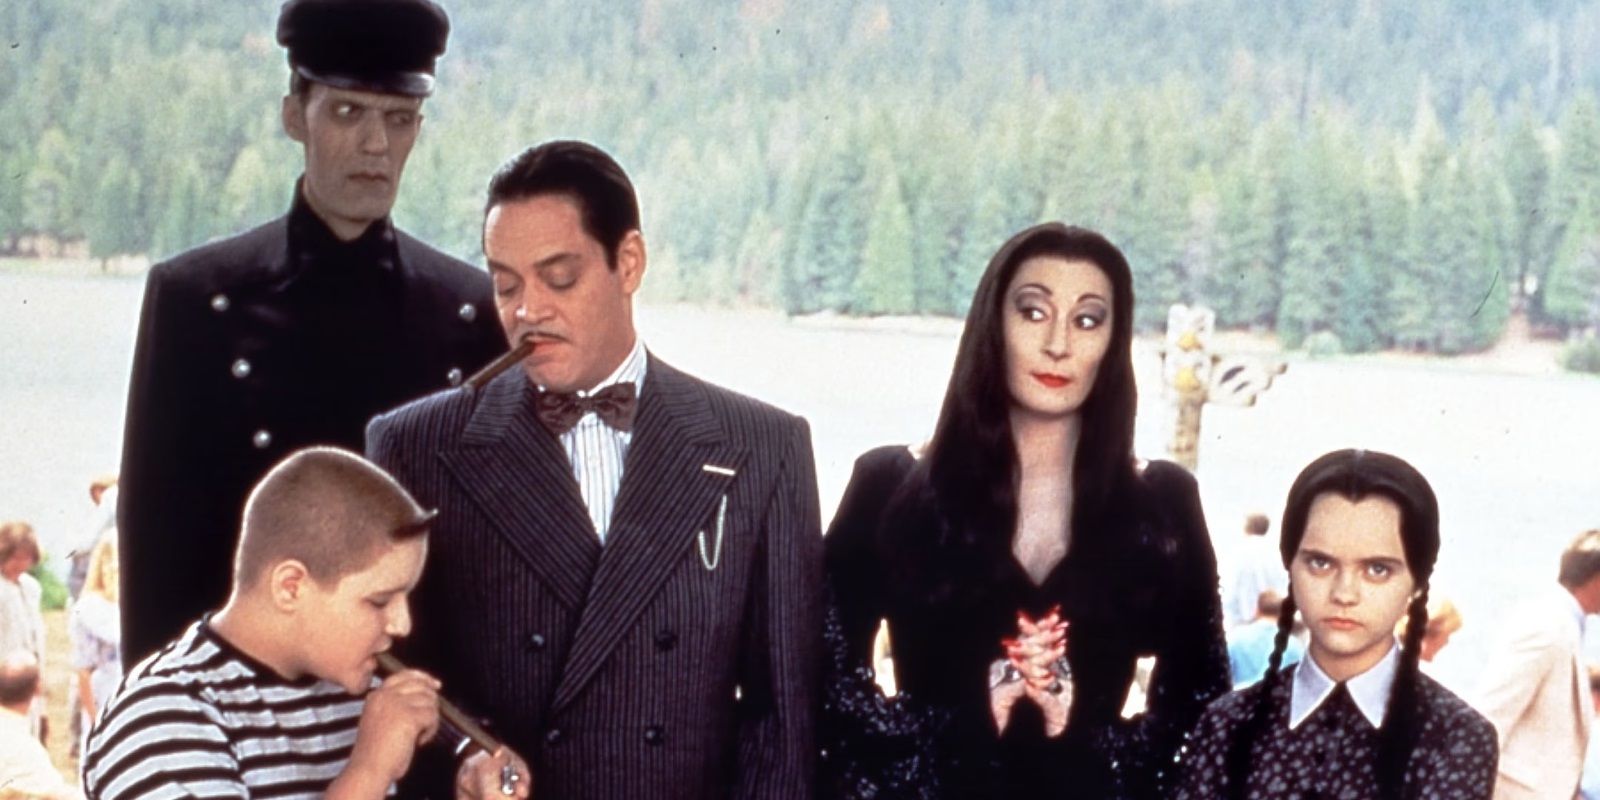 The family reunited in Addams Family Values